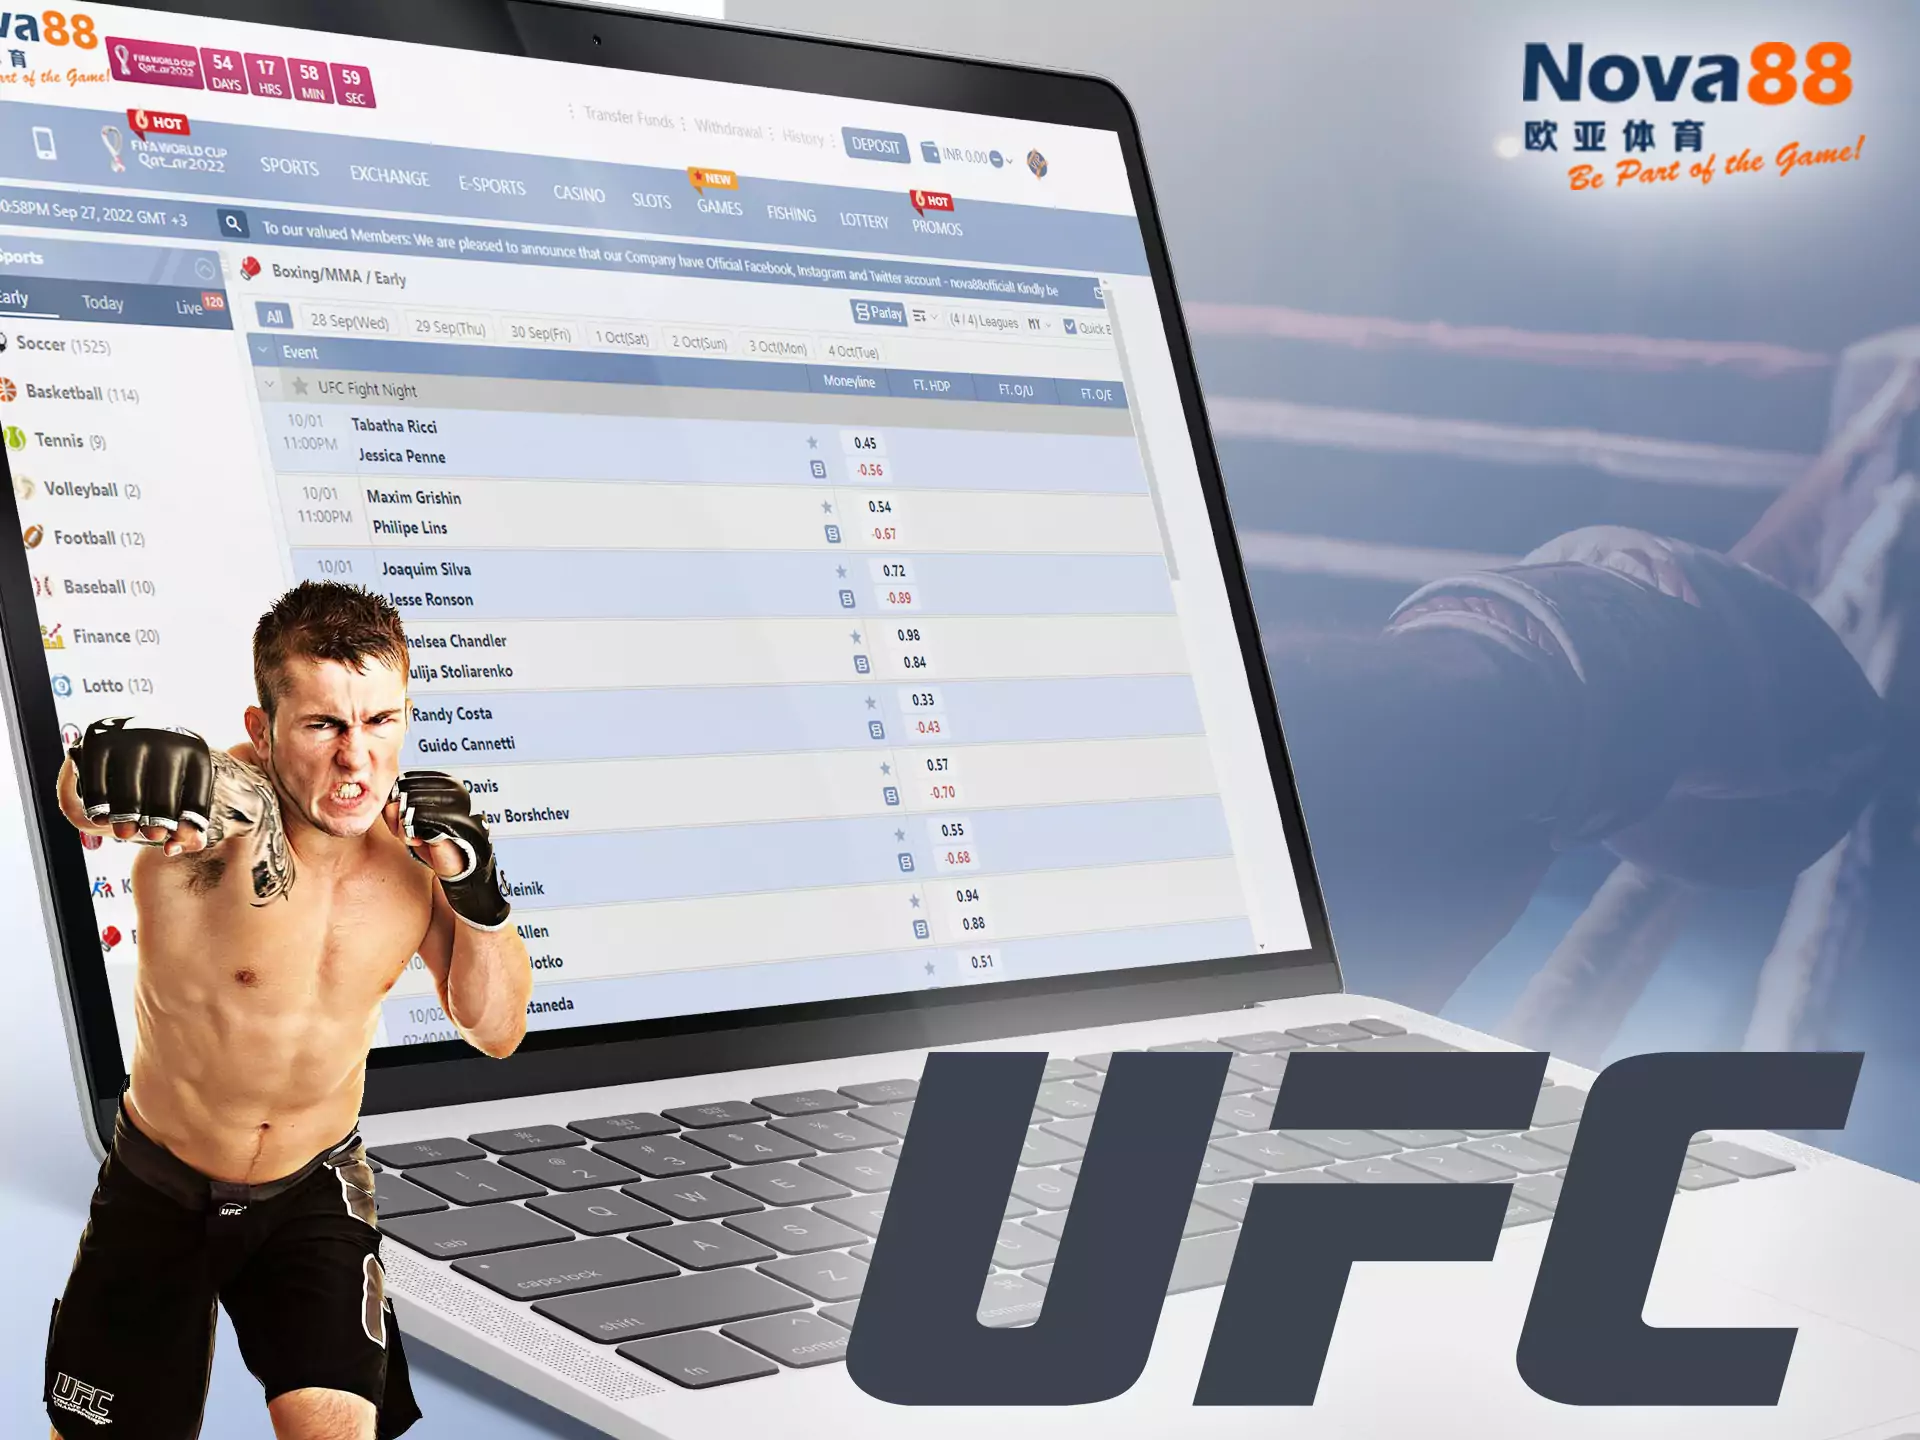 In the Nova88 sportsbook, you find lots of UFC fights.